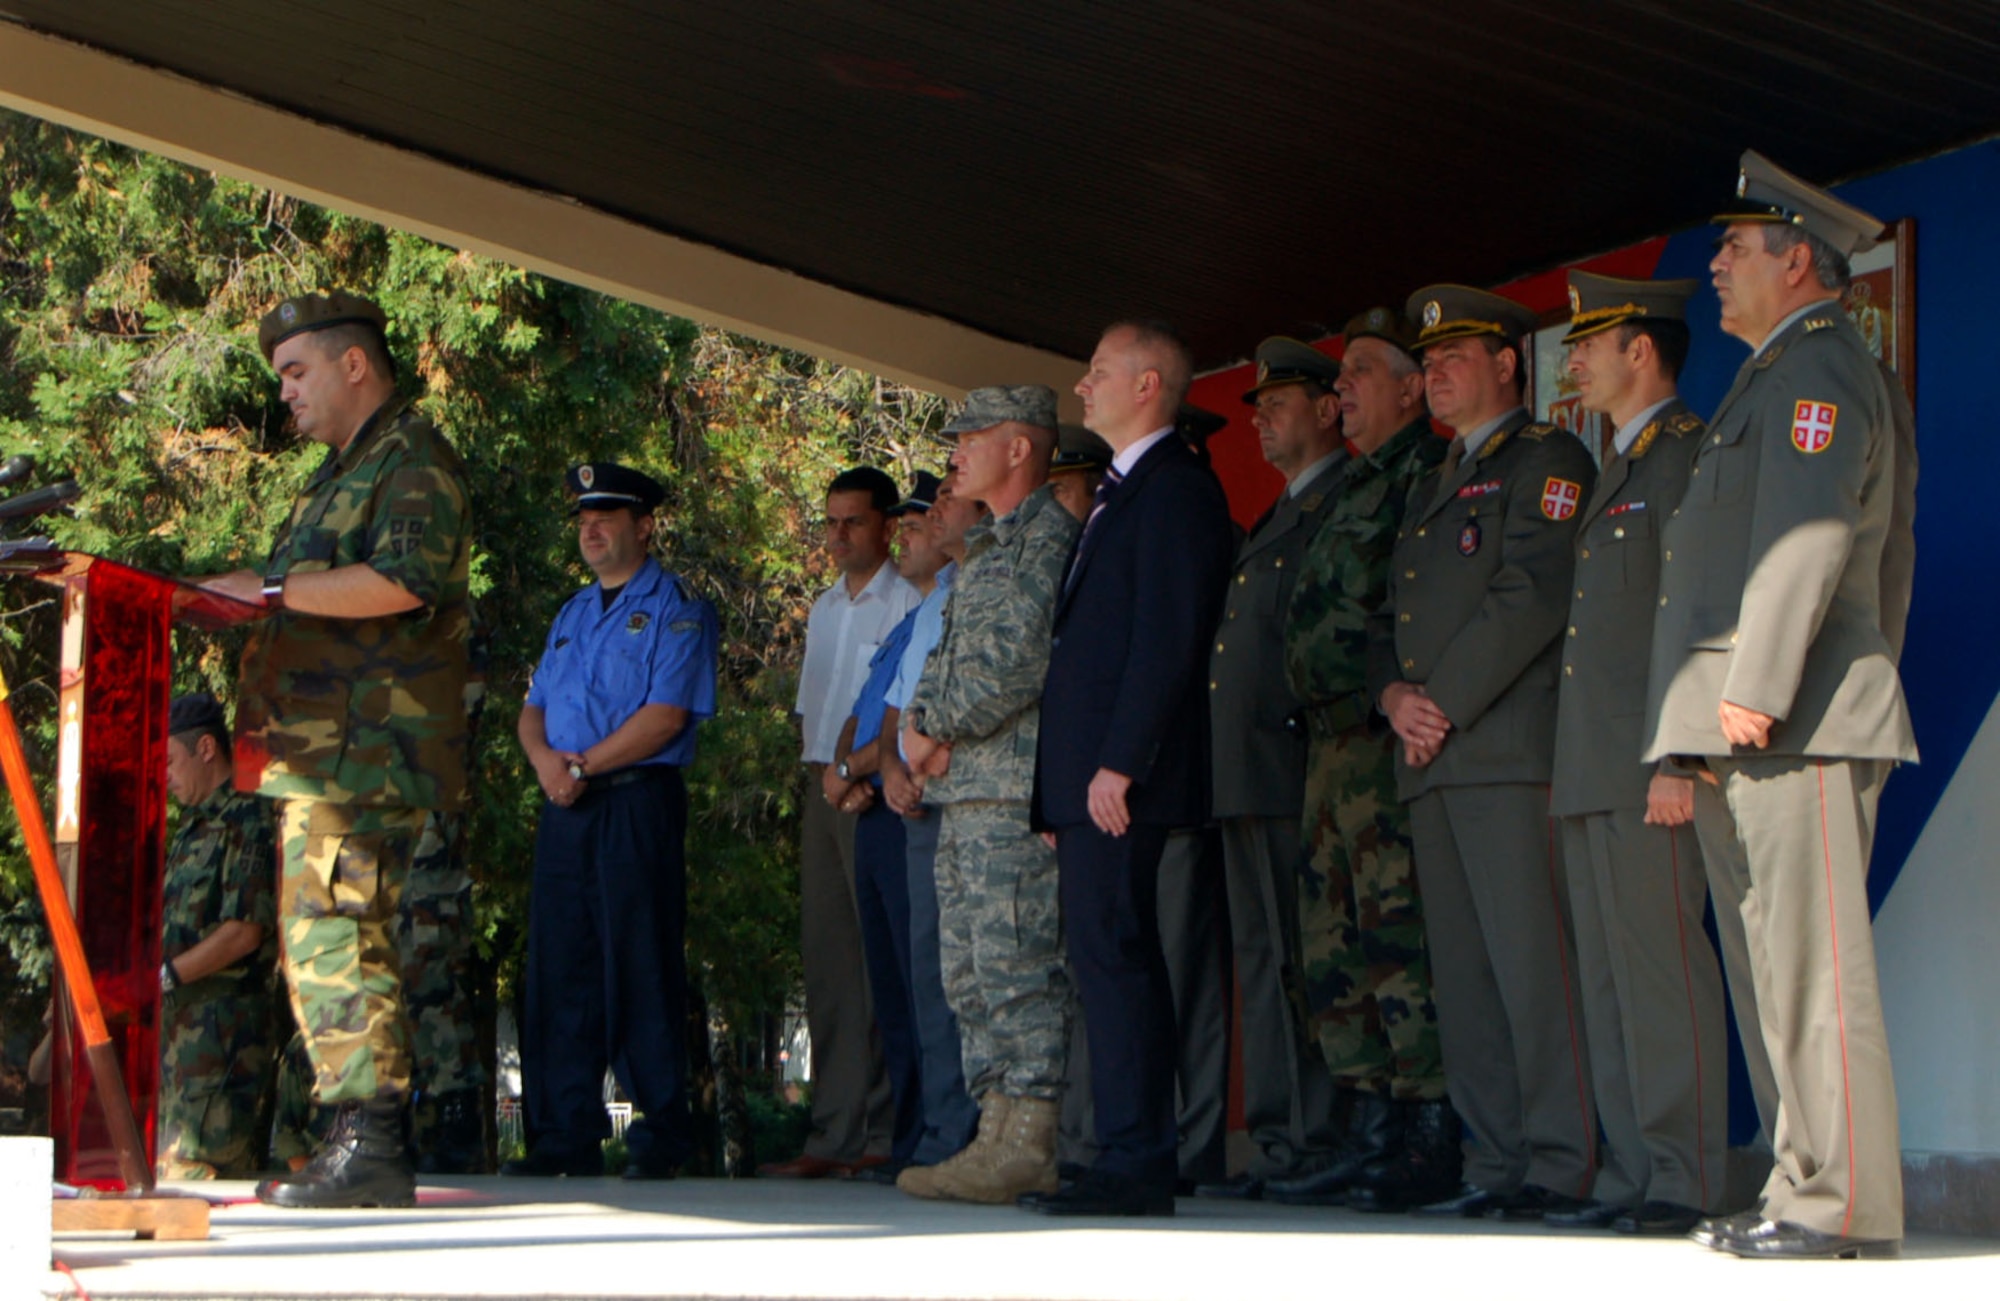 NIS, Serbia – Lt. Col. Goran Desancic, Serbian Armed Forces military medical training exercise in Central and Eastern Europe co-director, speaks to members of 15 nations participating in MEDCEUR 2009 while other distinguished visitors stand by. The exercise, which is hosting more than 600 participants, is scheduled for Sept. 2-13. (U.S. Air Force photo/Senior Airman Kali L. Gradishar)